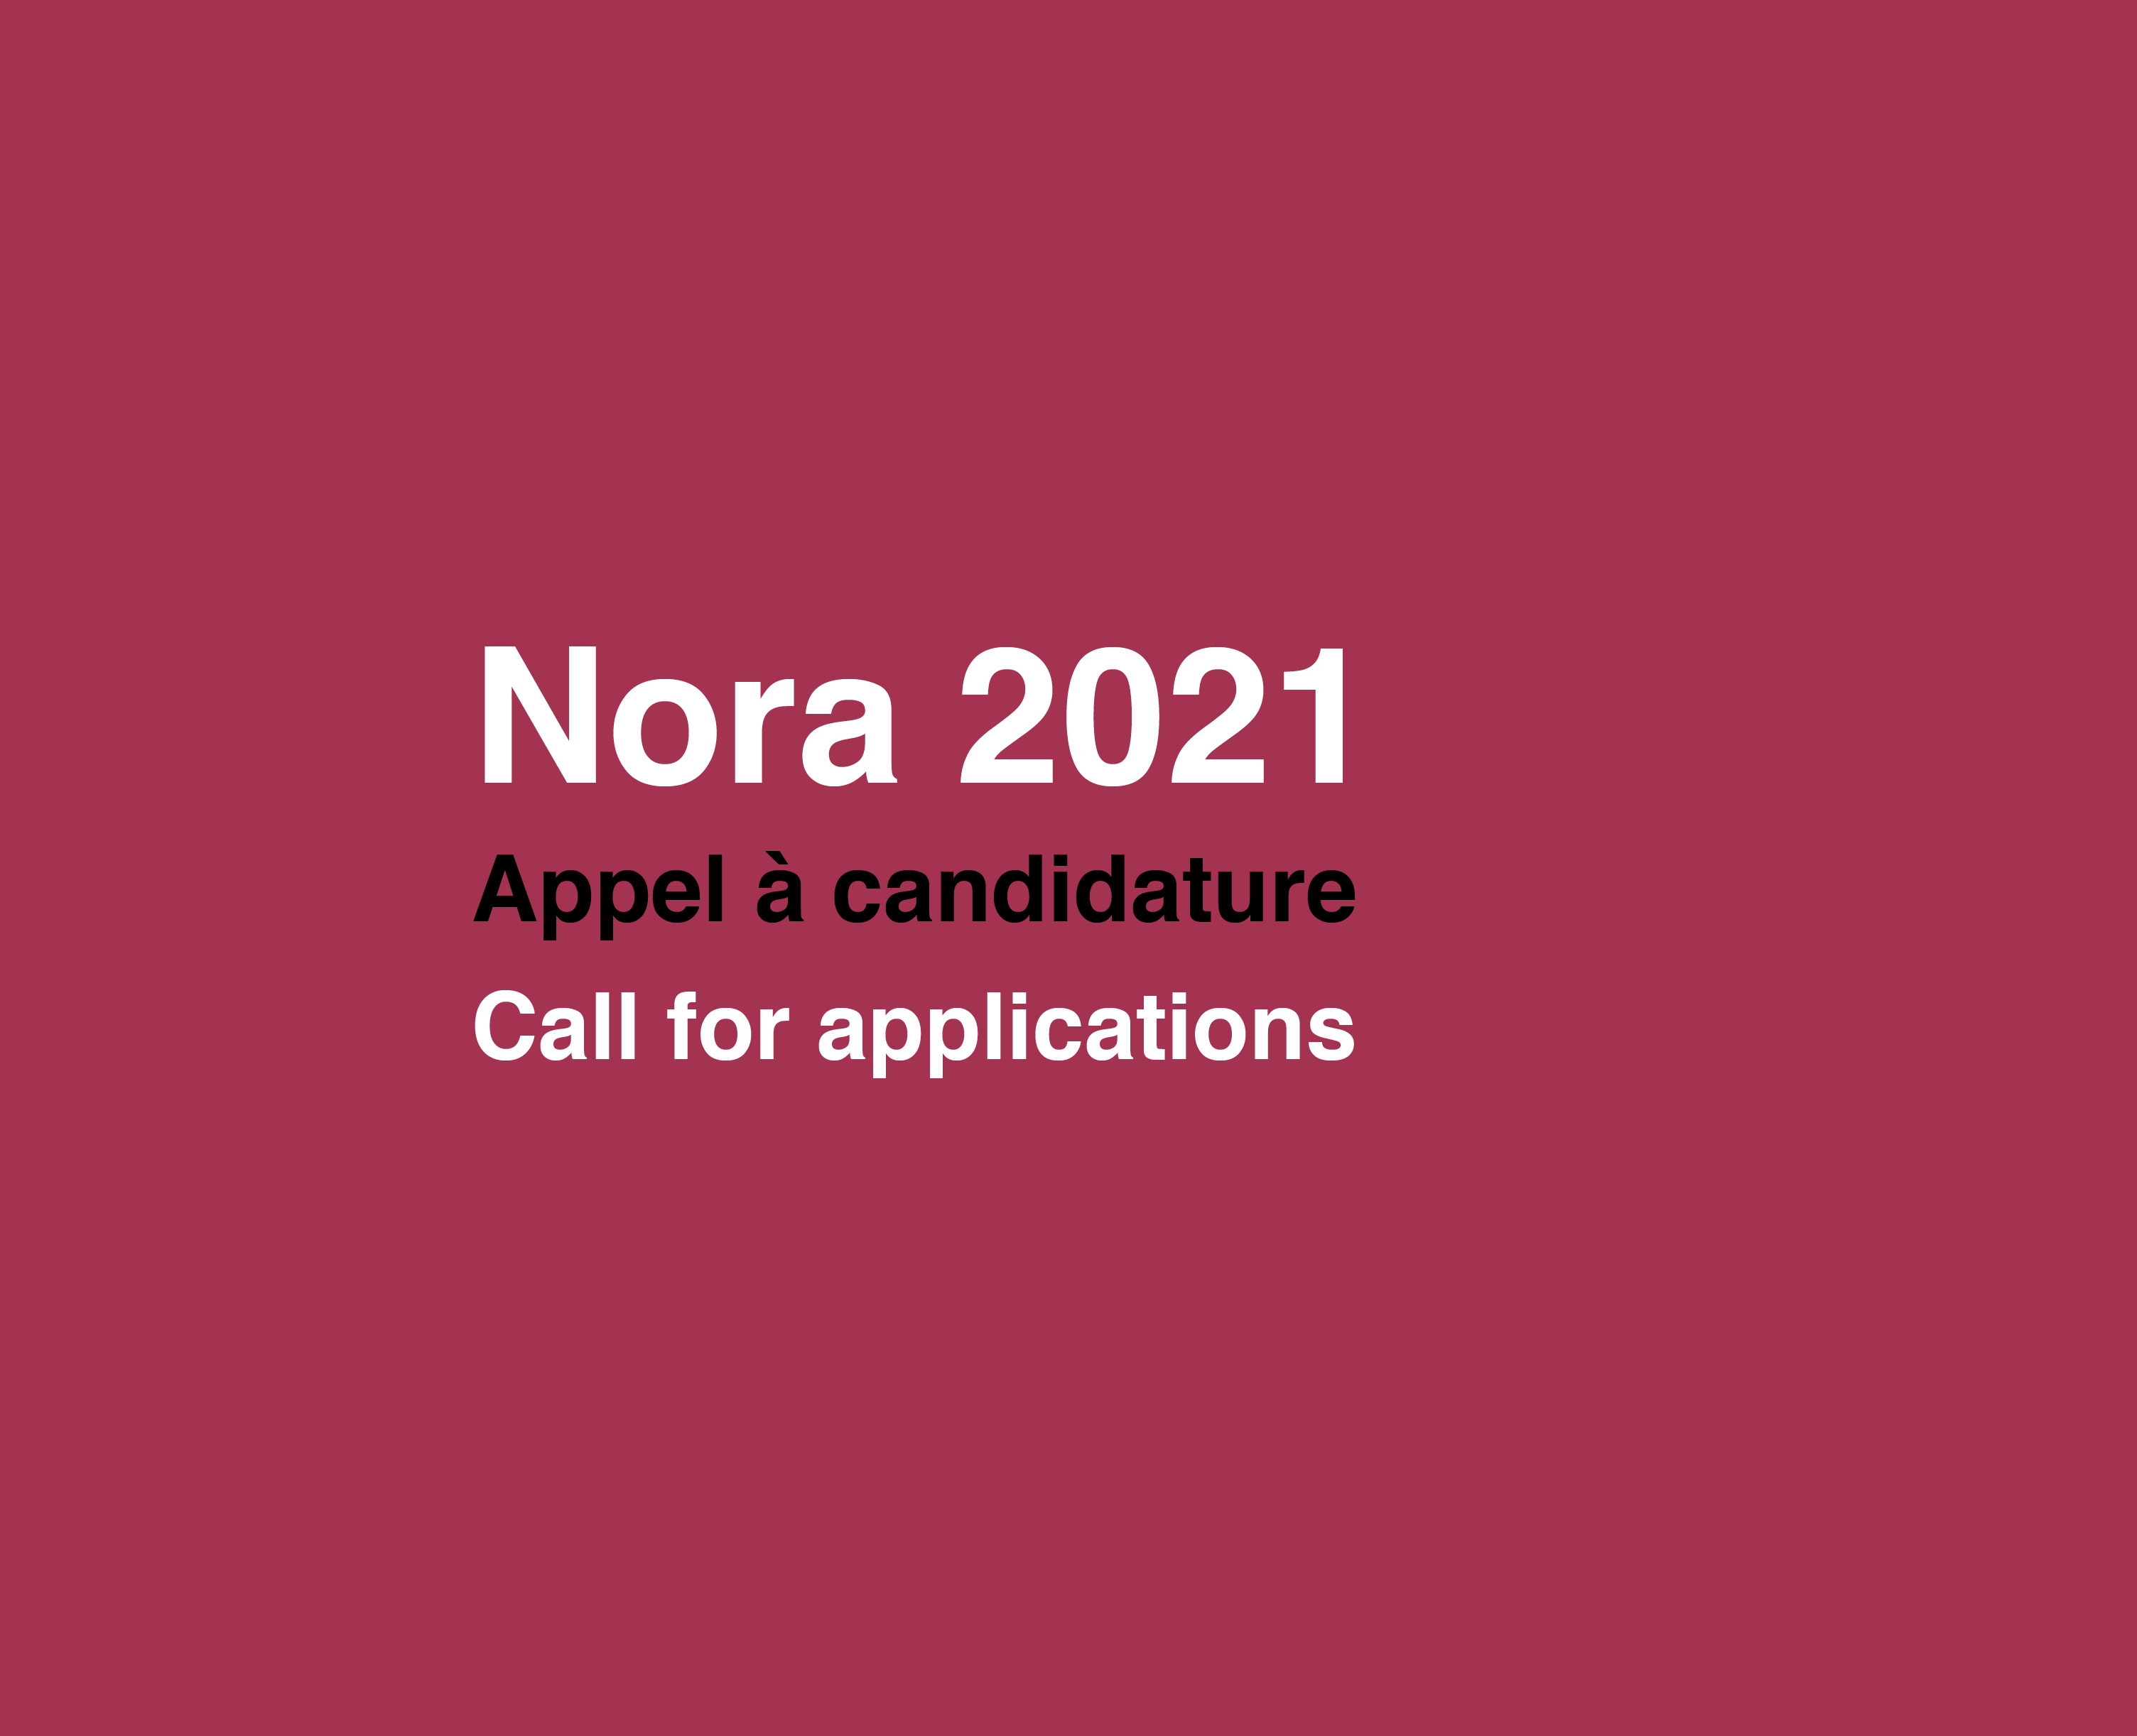 Nora 2021 - Artist-in-residence call for project